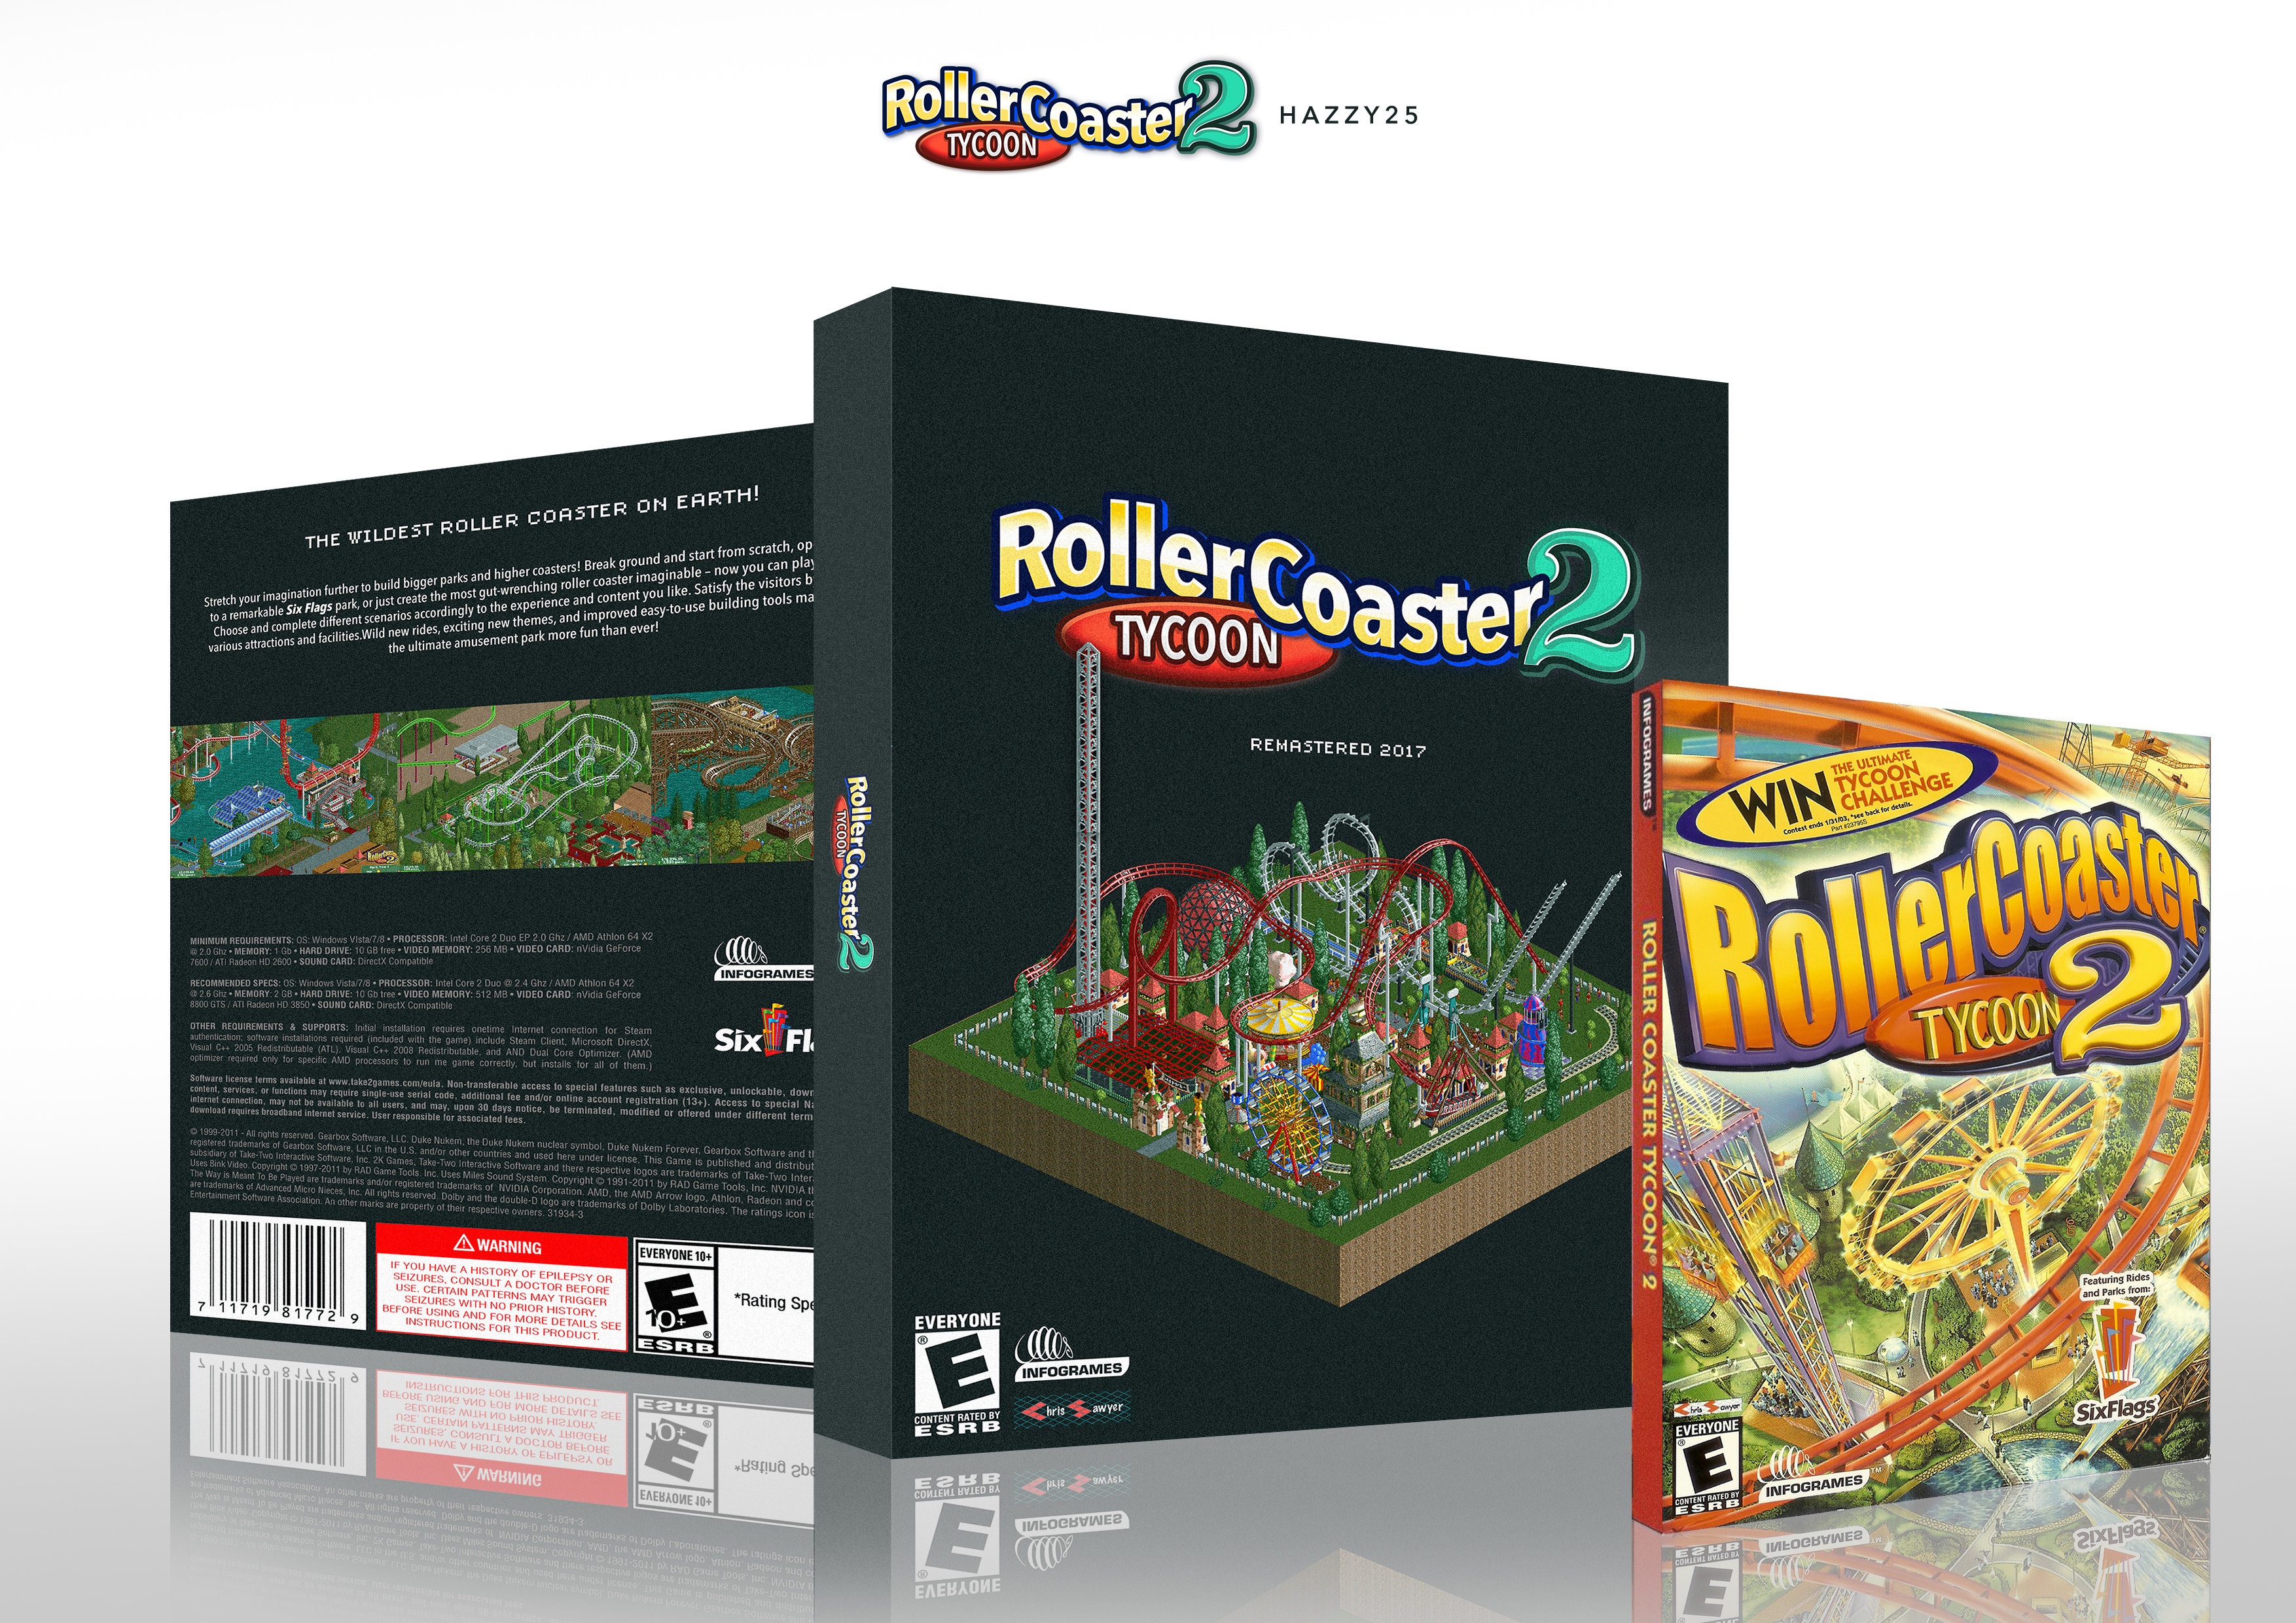 Roller Coaster Tycoon 2 – Remastered box cover